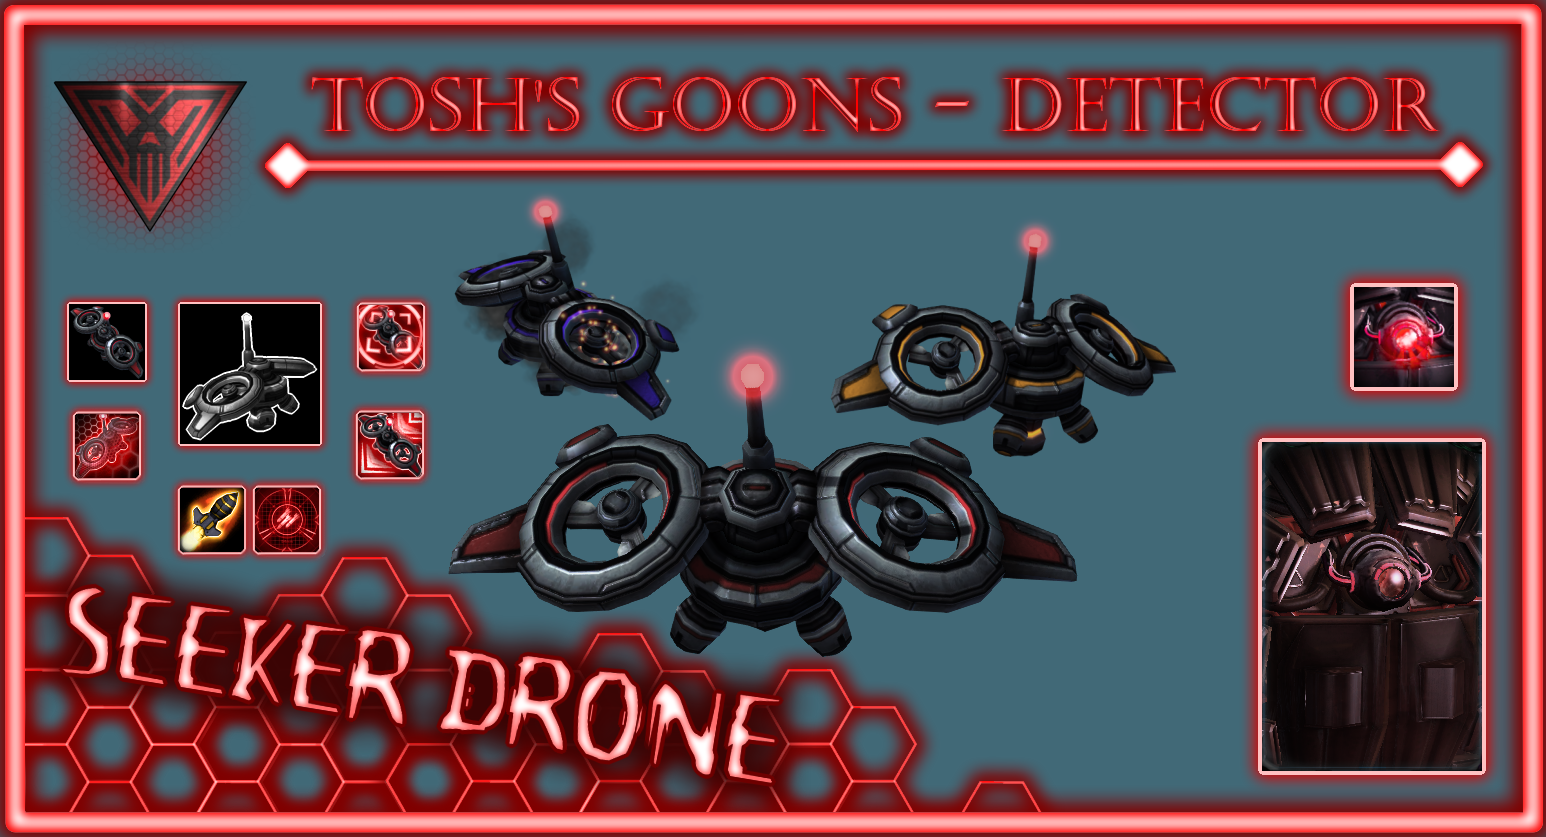 Tosh's Goons - Seeker Droid